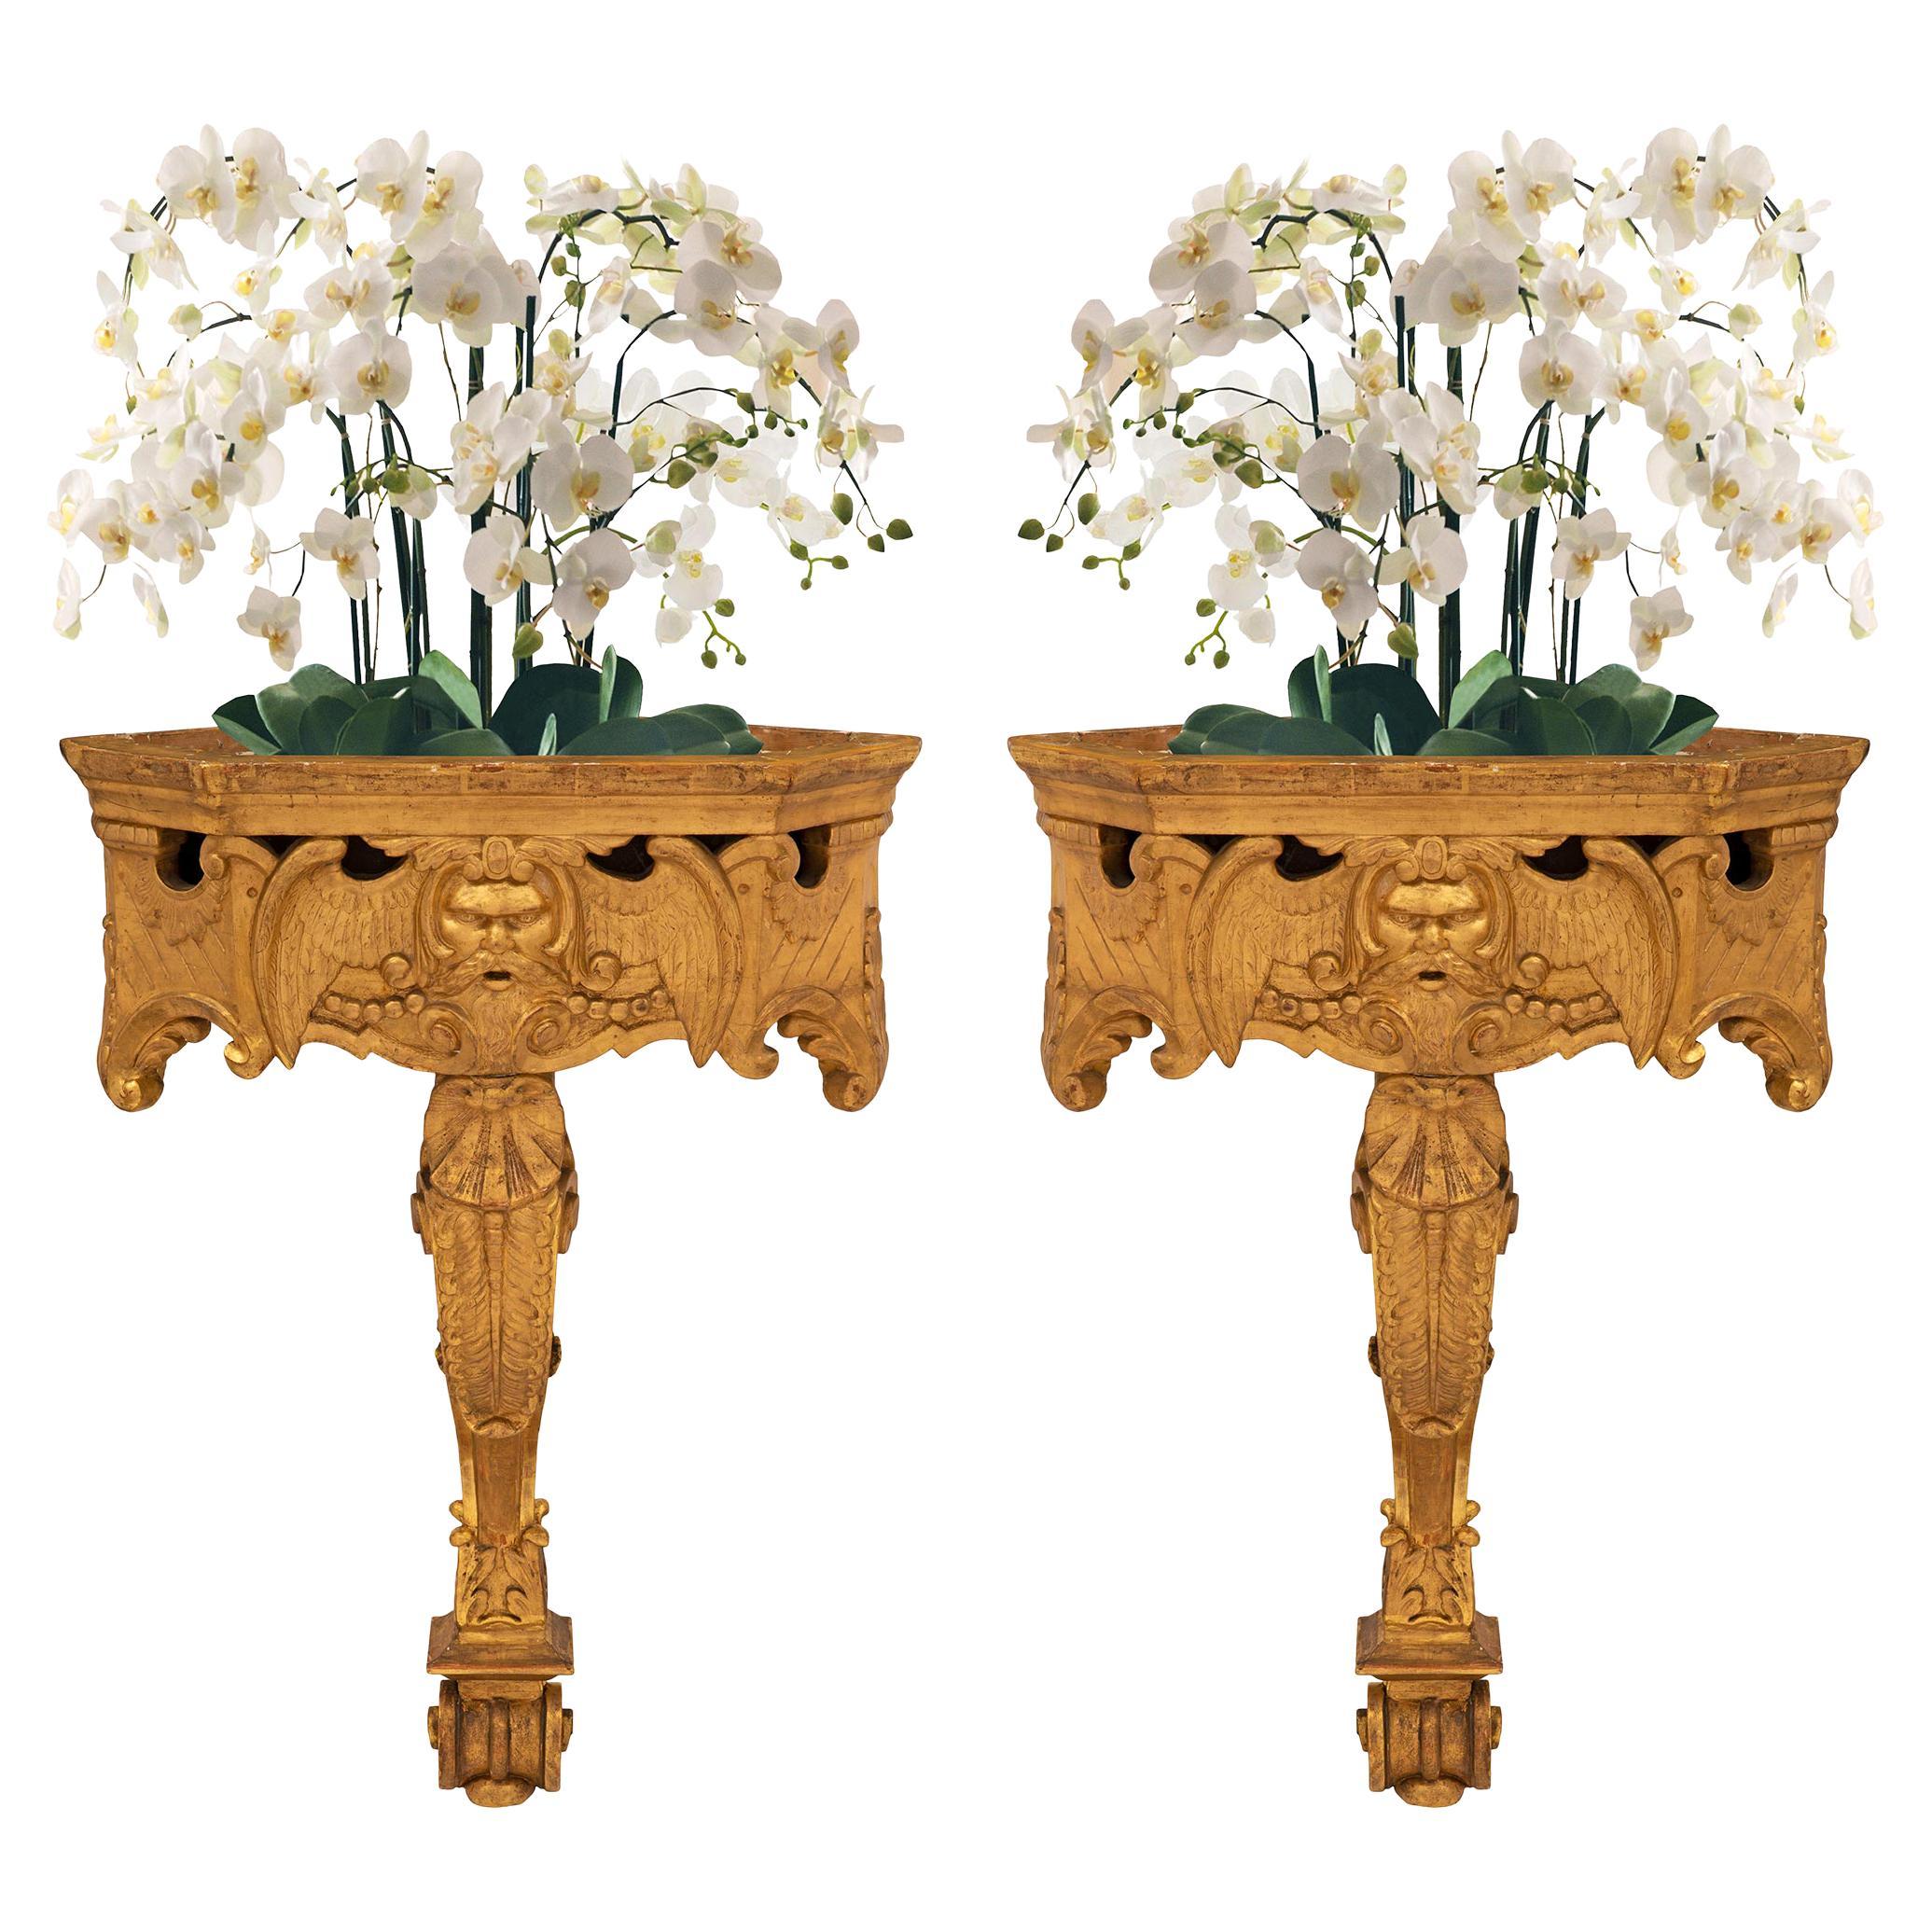 Pair of Italian Early 19th Century Wall Mounted Giltwood Consoles For Sale